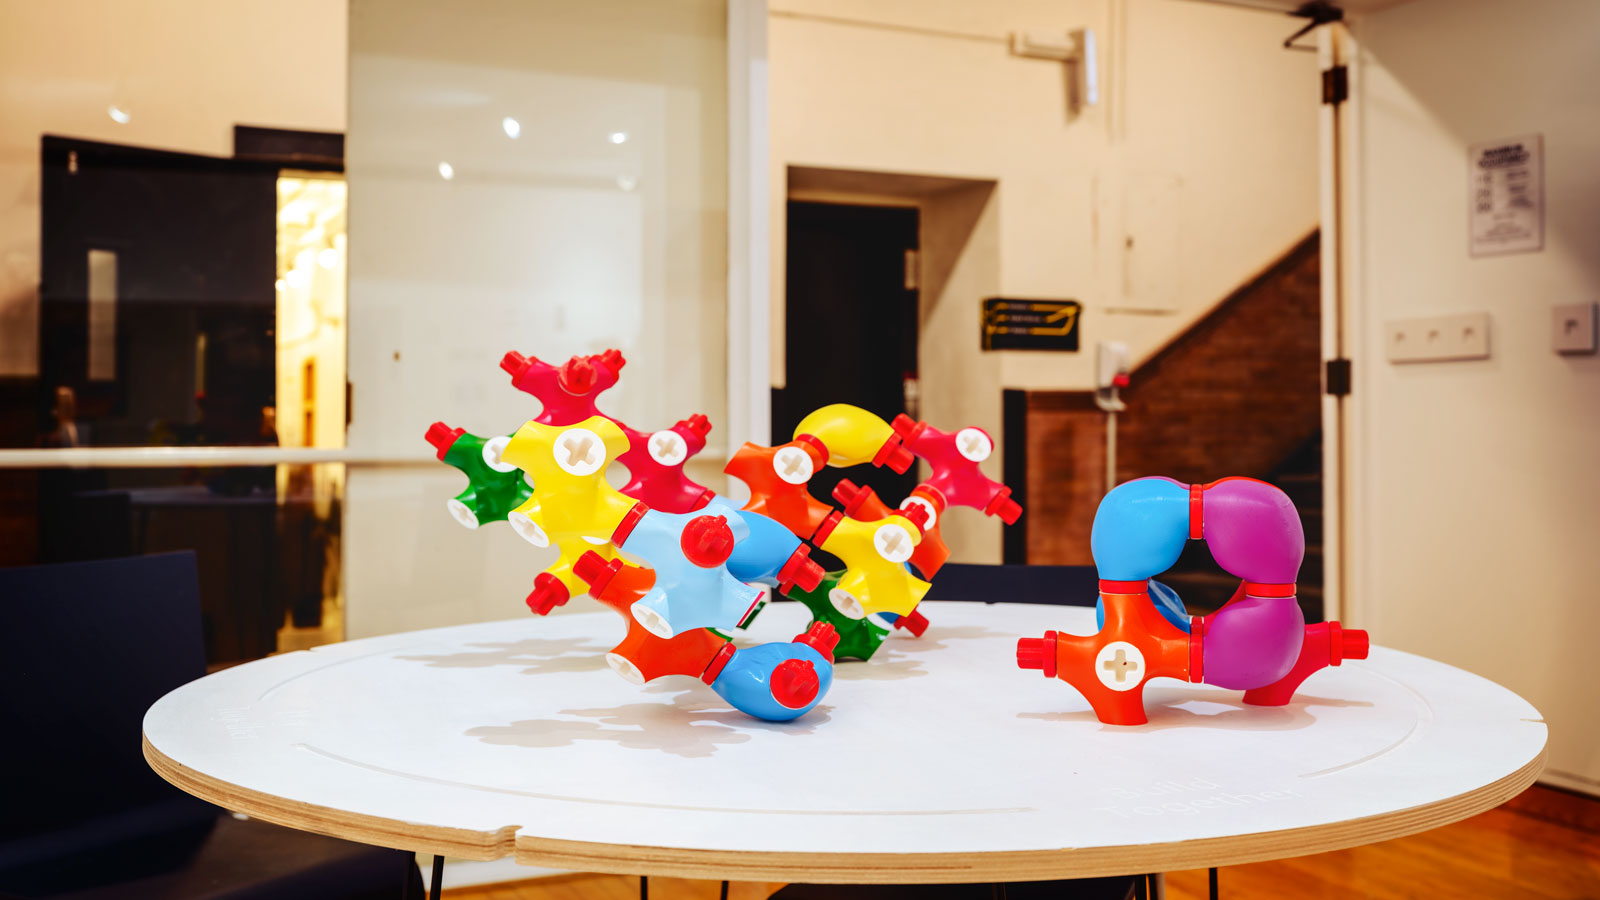 Small, brightly colored, toy-like sculptures from the work "The Civic Playground Project"